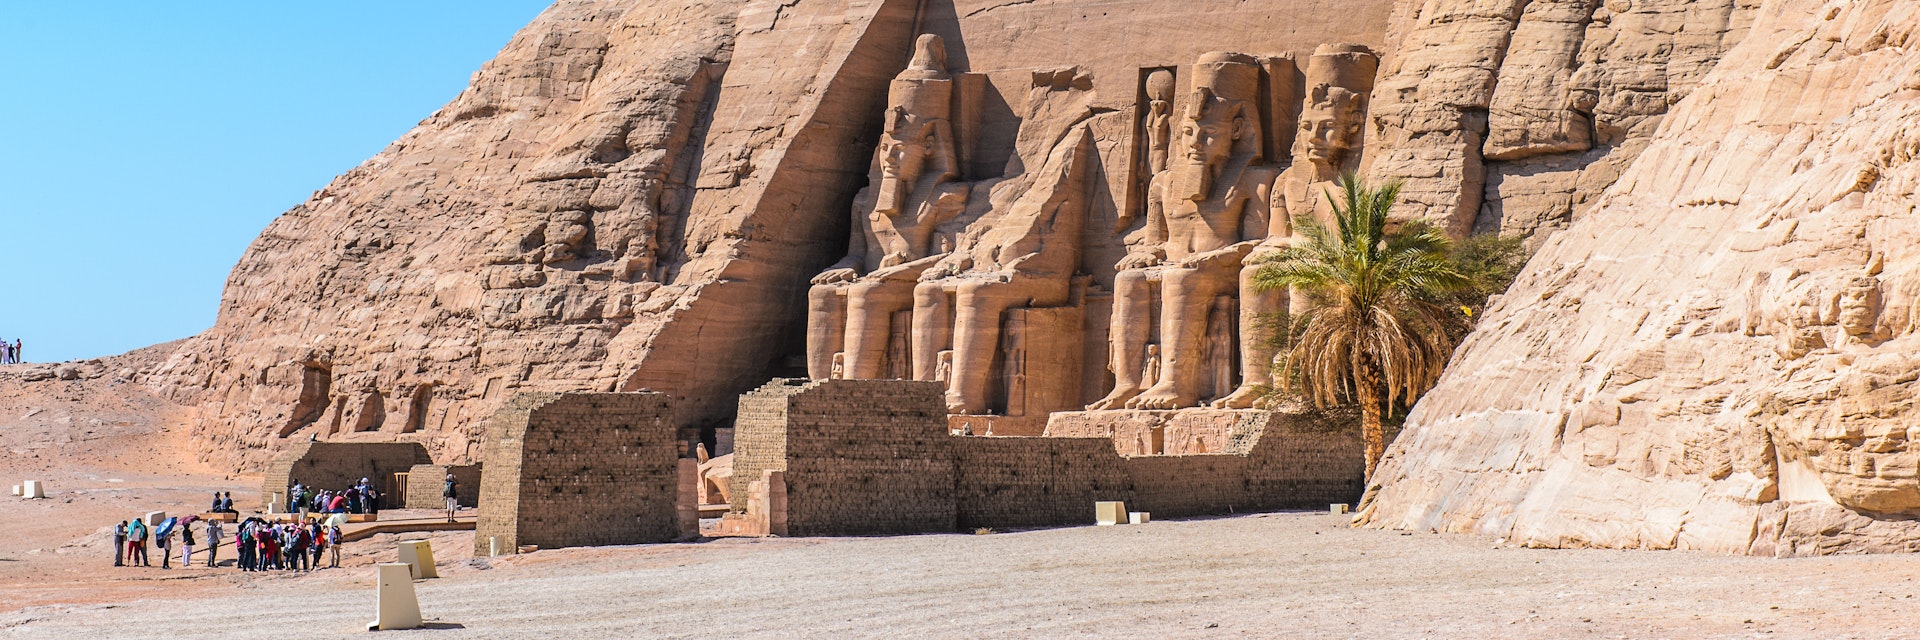 The Great Temple of Ramesses II, Abu Simbel.
236409301
archaeological, relief, tomb, stone, sculpture, travel, rock, statue, culture, landmark, queen, history, god, egypt, dynasty, africa, lake, nile, building, nasser, religious, tourist, historic, egyptian, enormous, ramses, nubian, world, unesco, aswan, famous, heritage, architecture, temple, king, pharaoh, highlight, desert, religion, ancient, monument, colossus, memorial, archaeology, faraon, ramesses, abu, simbel, nefertari, faraonic